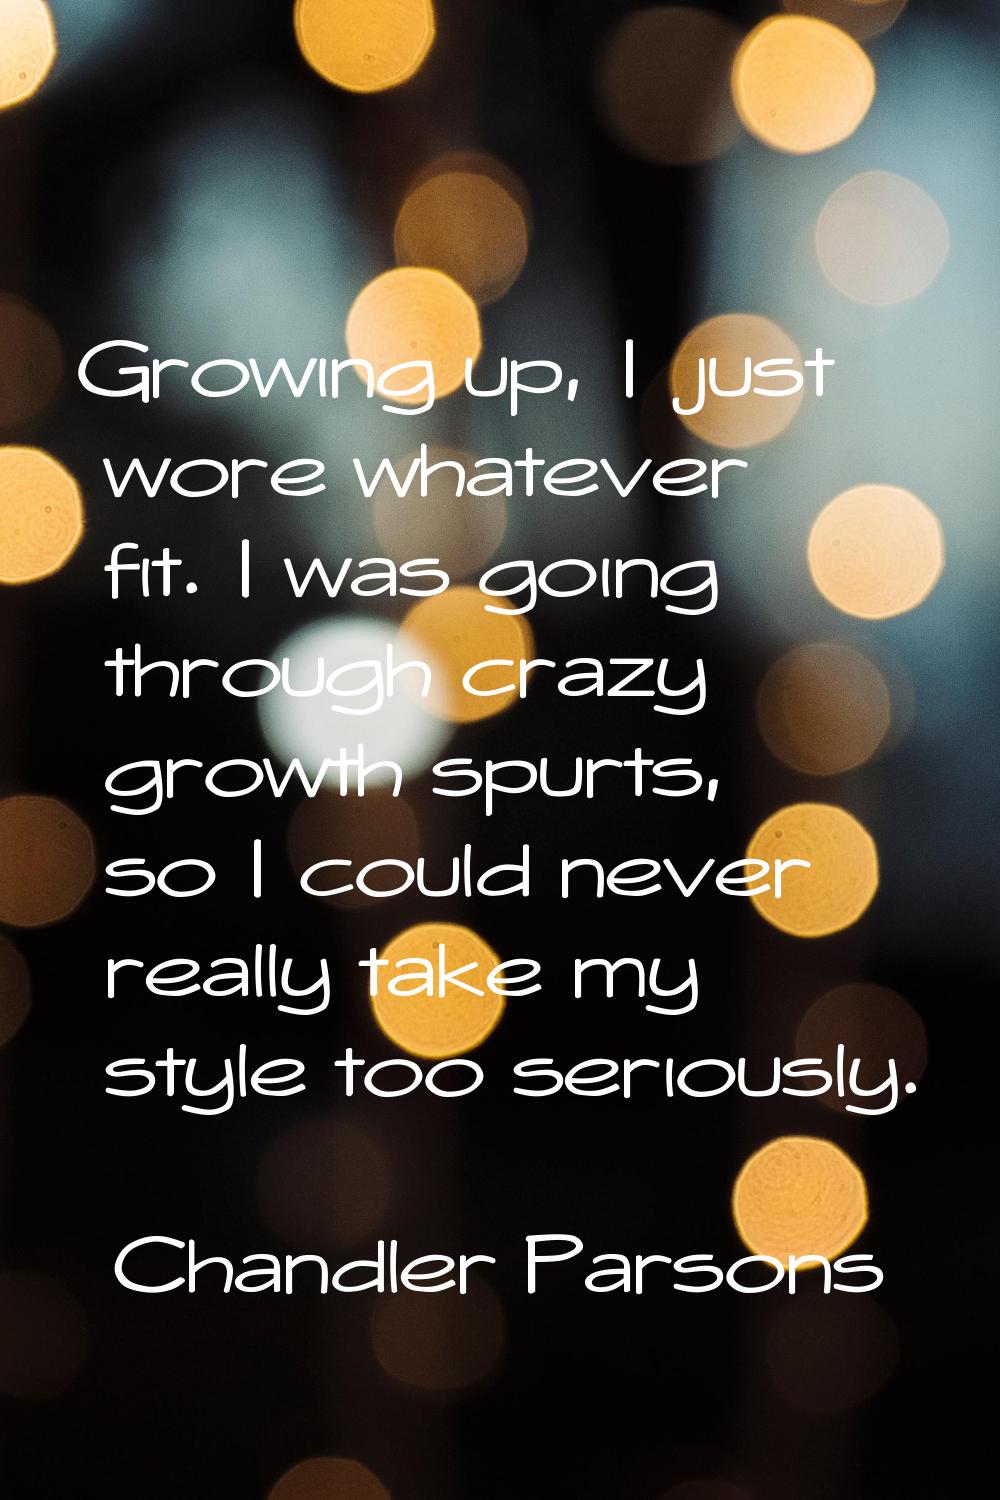 Growing up, I just wore whatever fit. I was going through crazy growth spurts, so I could never rea